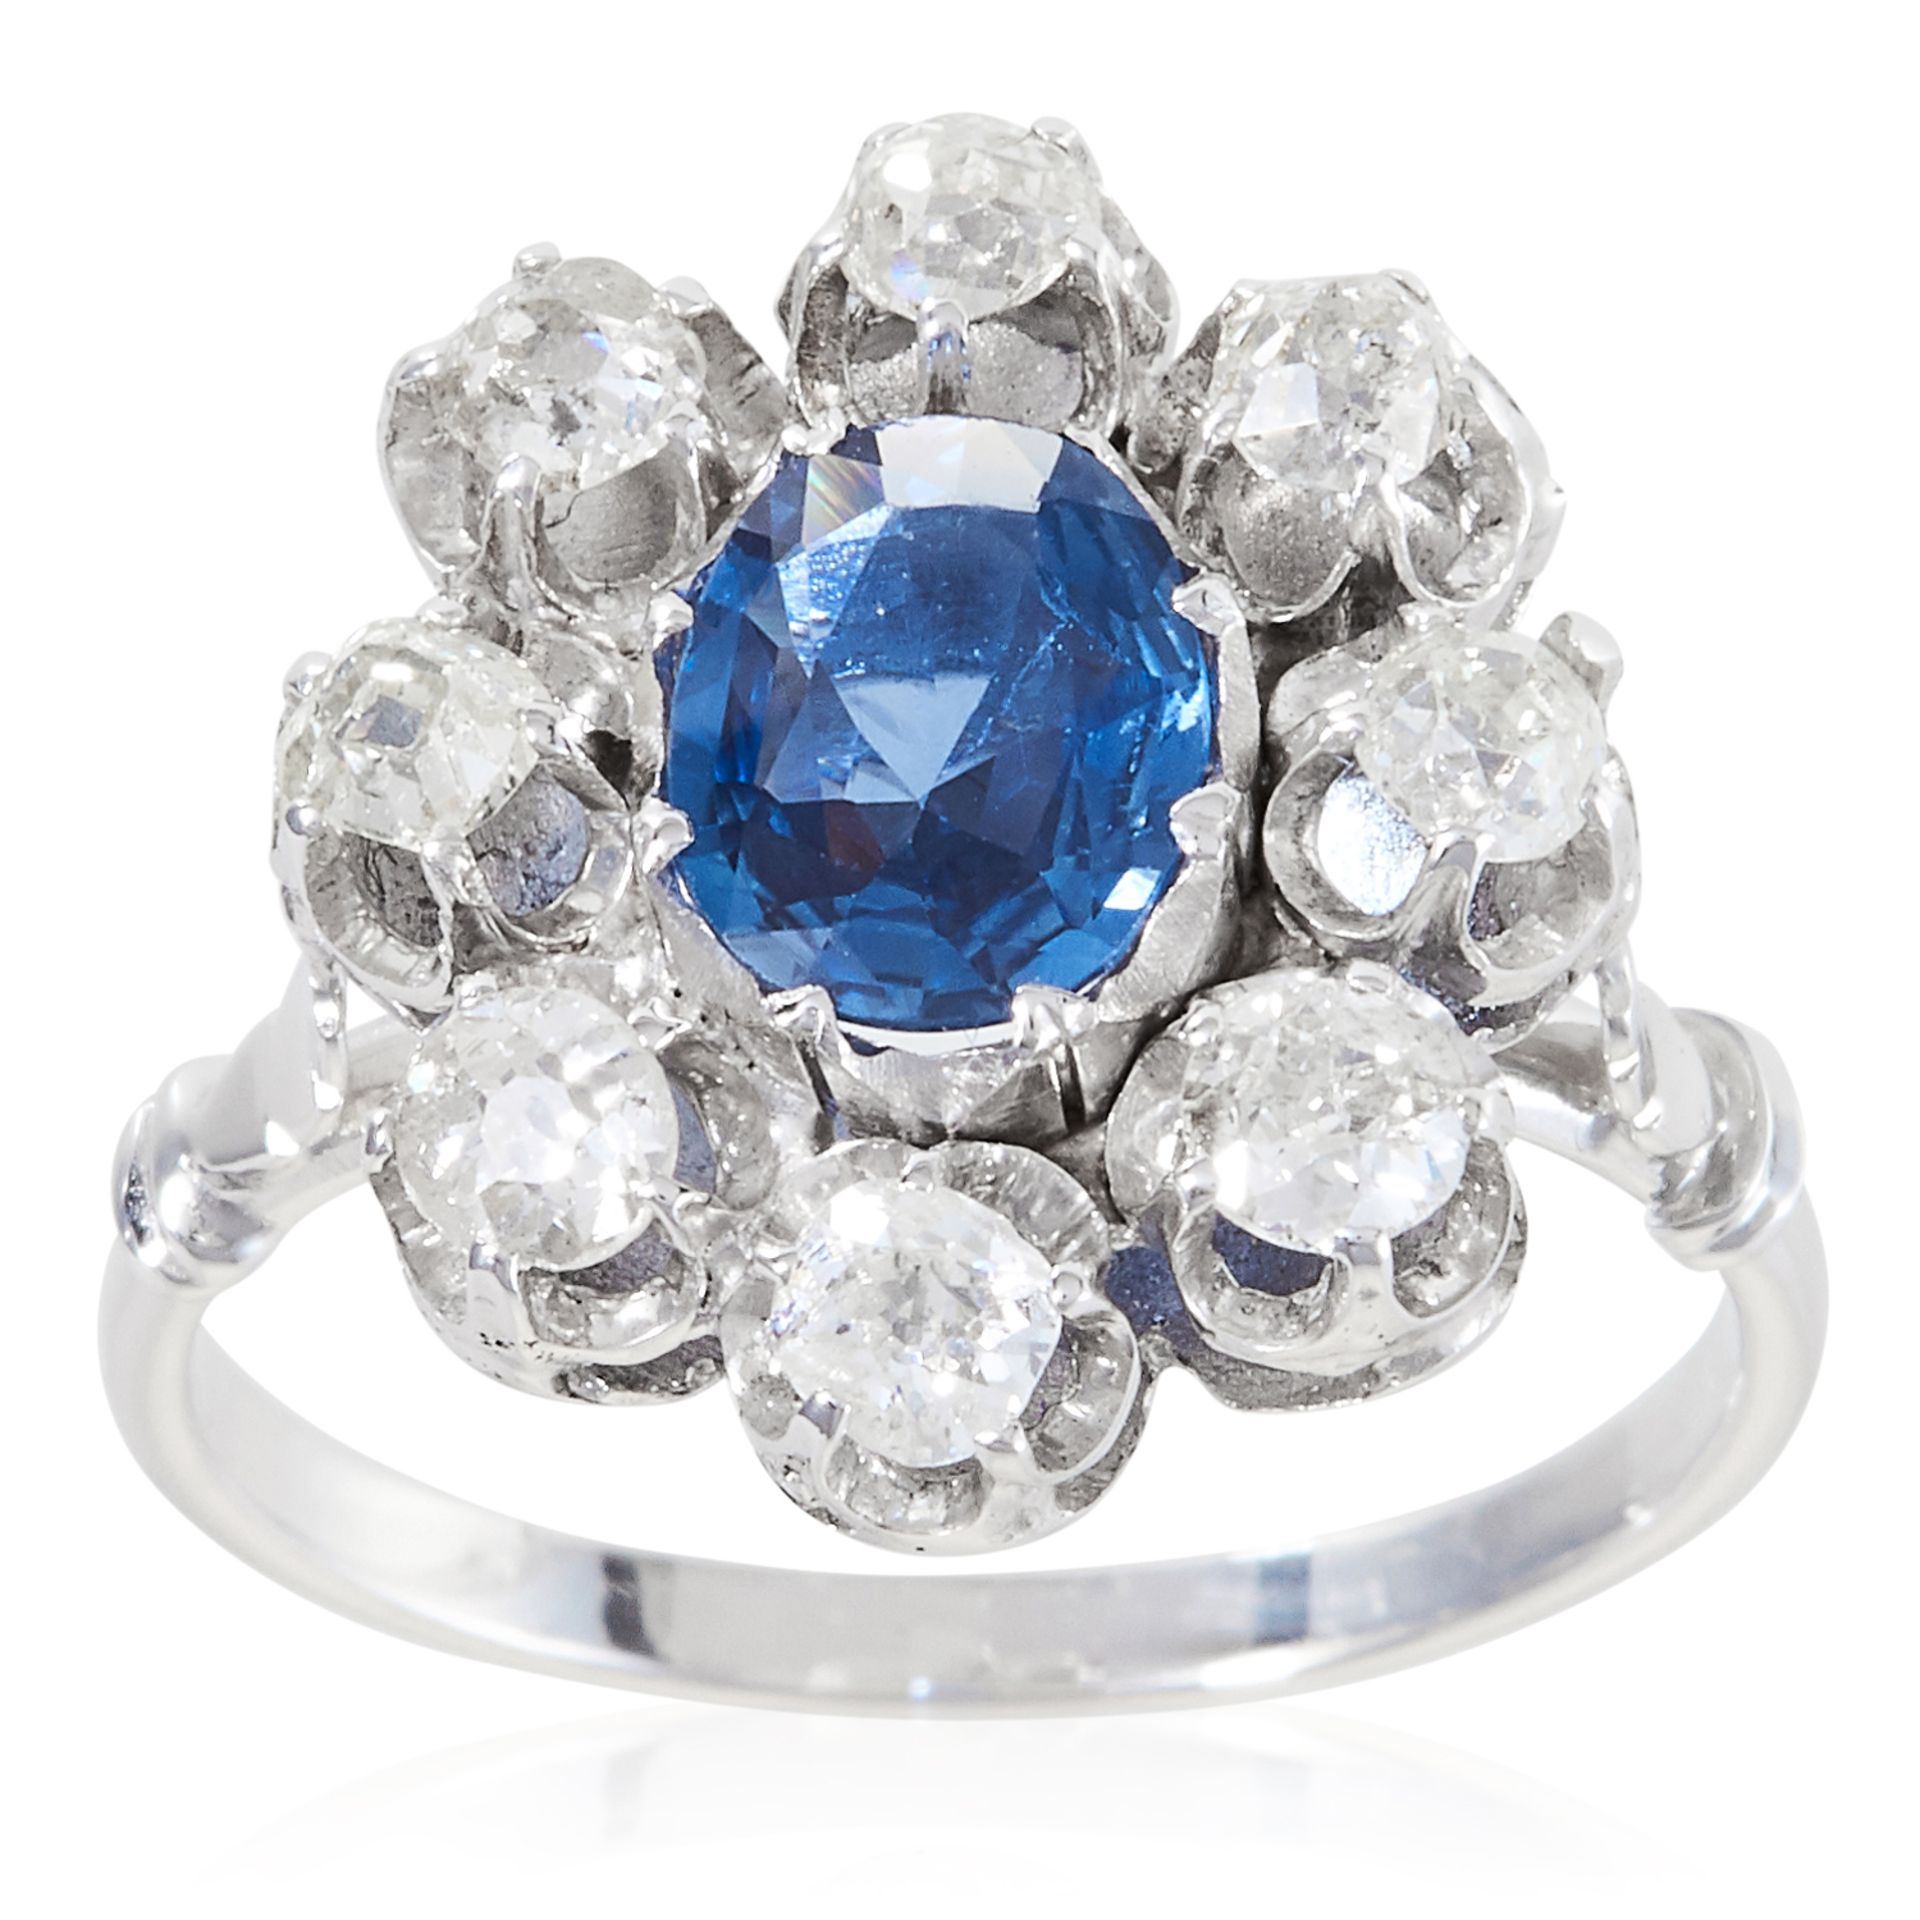 A SAPPHIRE AND DIAMOND CLUSTER RING in platinum or white gold, the oval cut sapphire encircled by